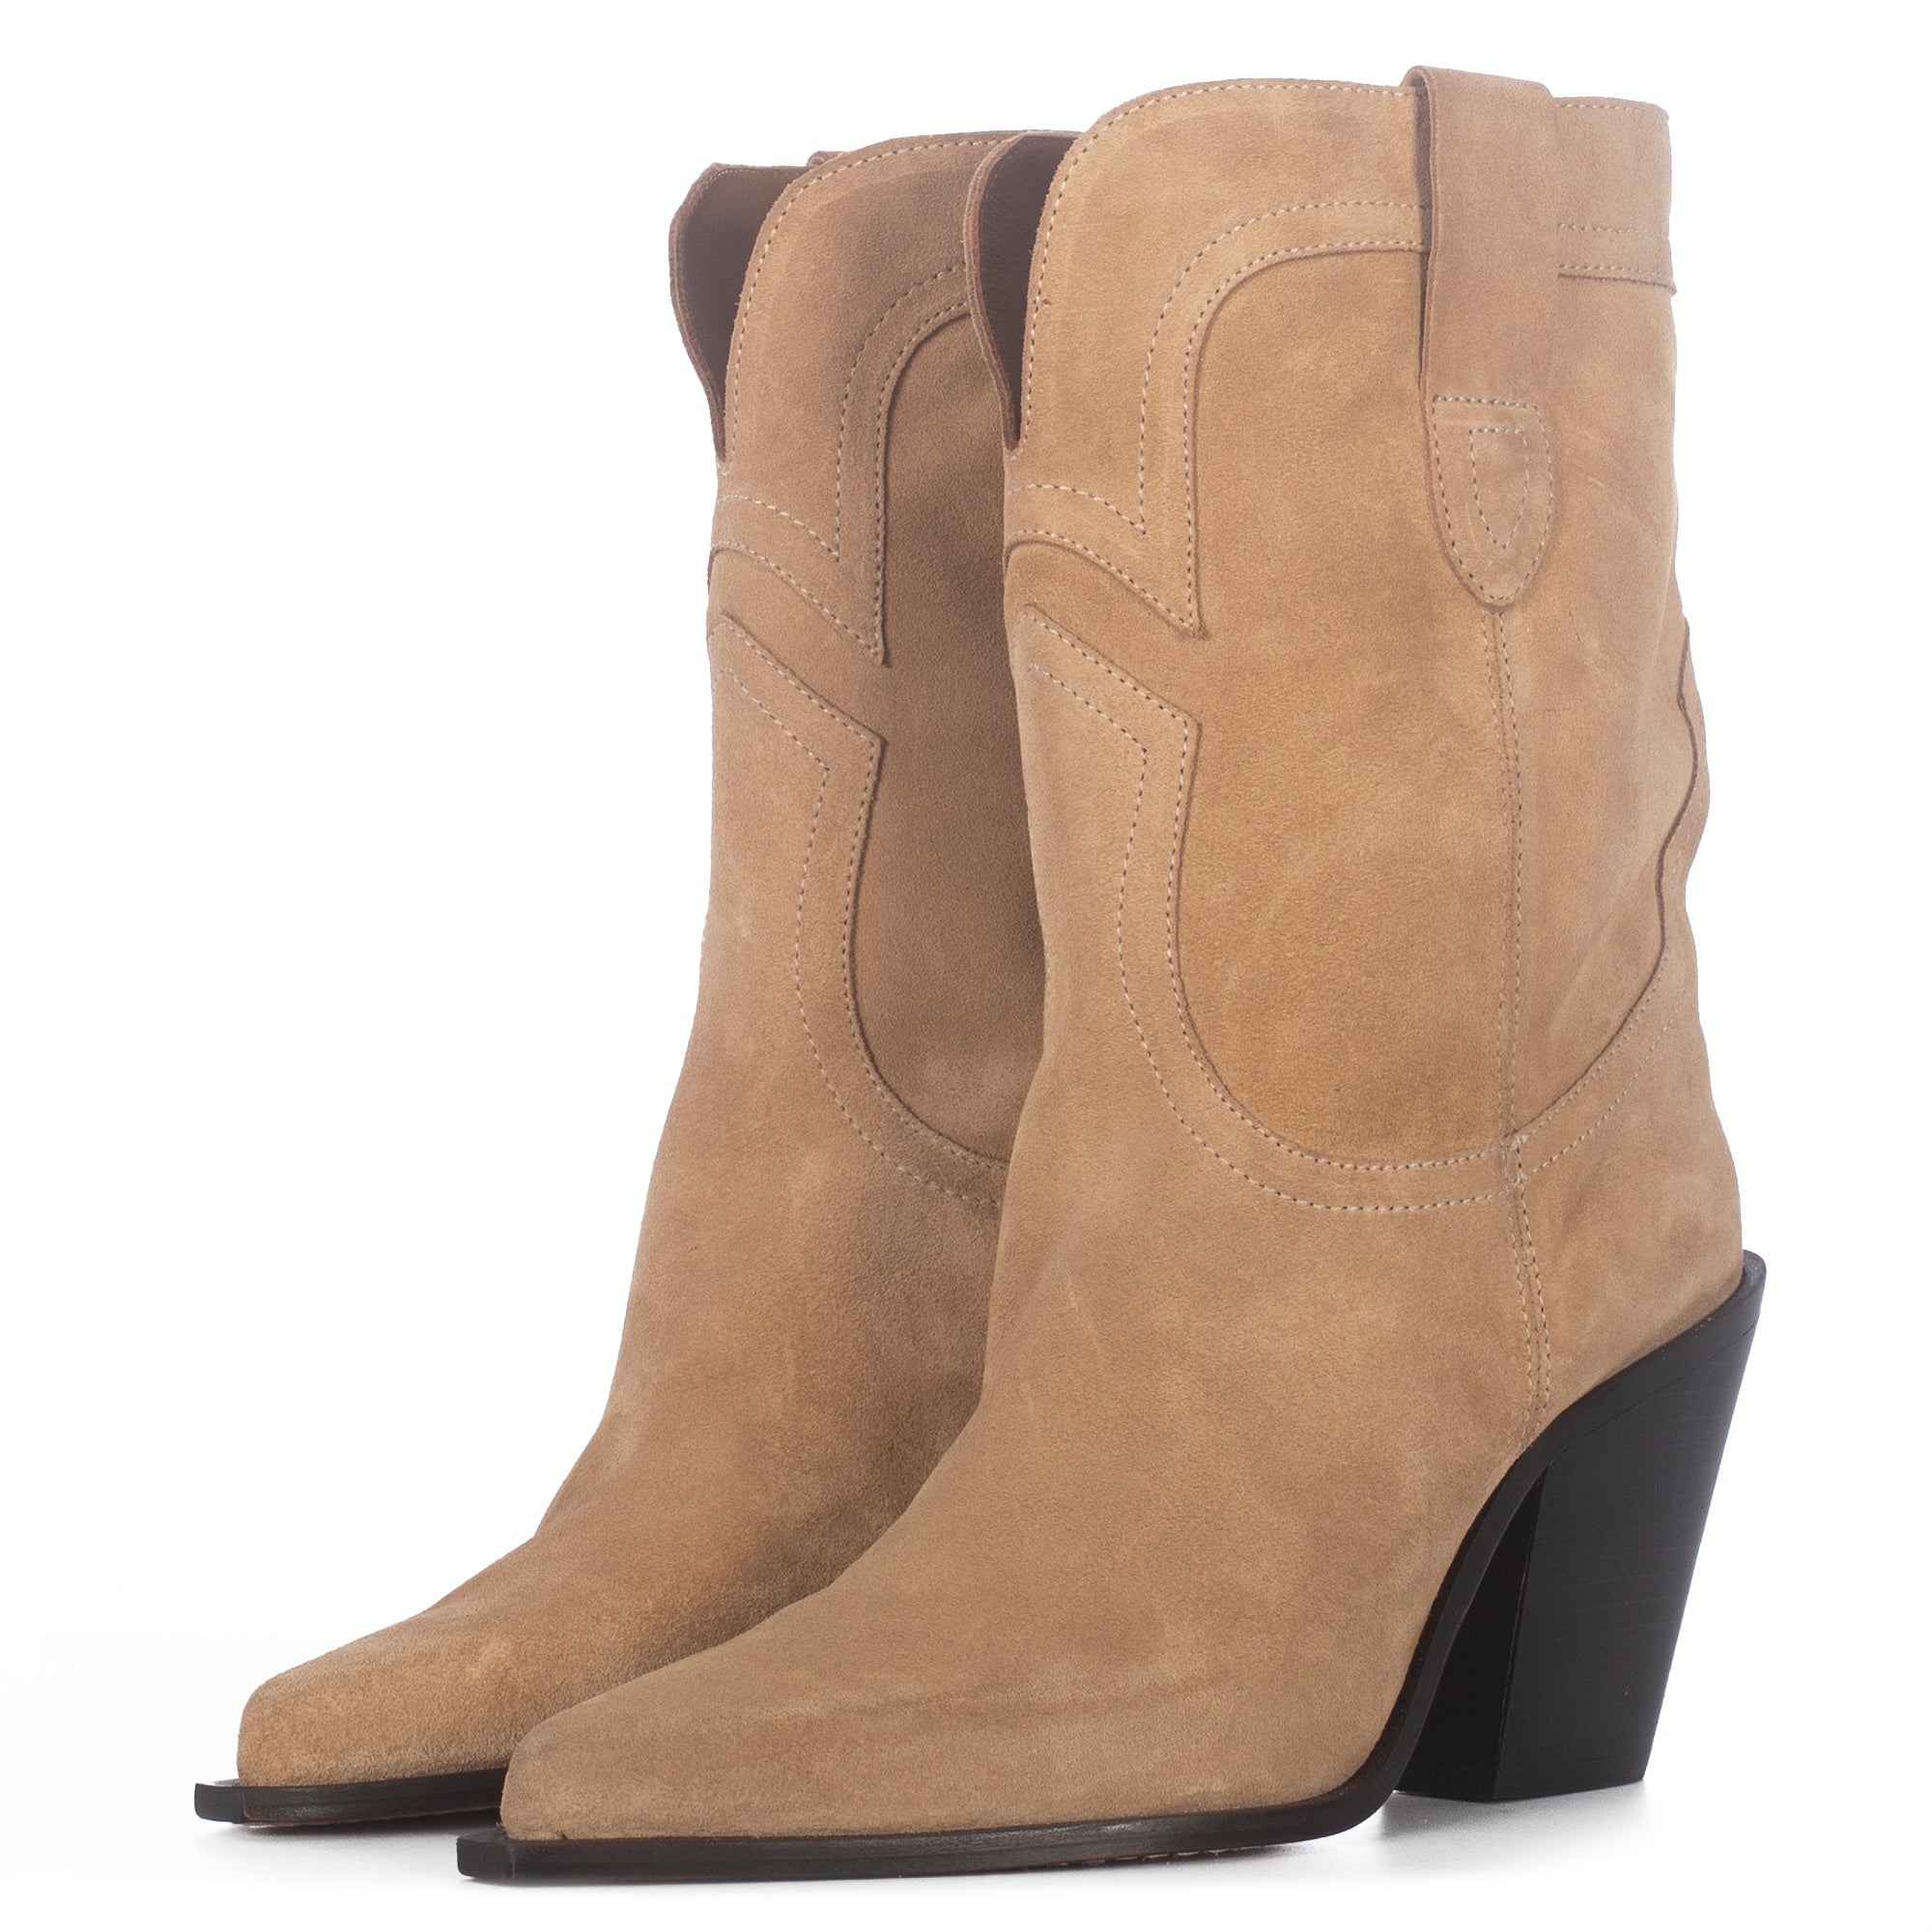 HELGA SAND SUEDE BOOTS